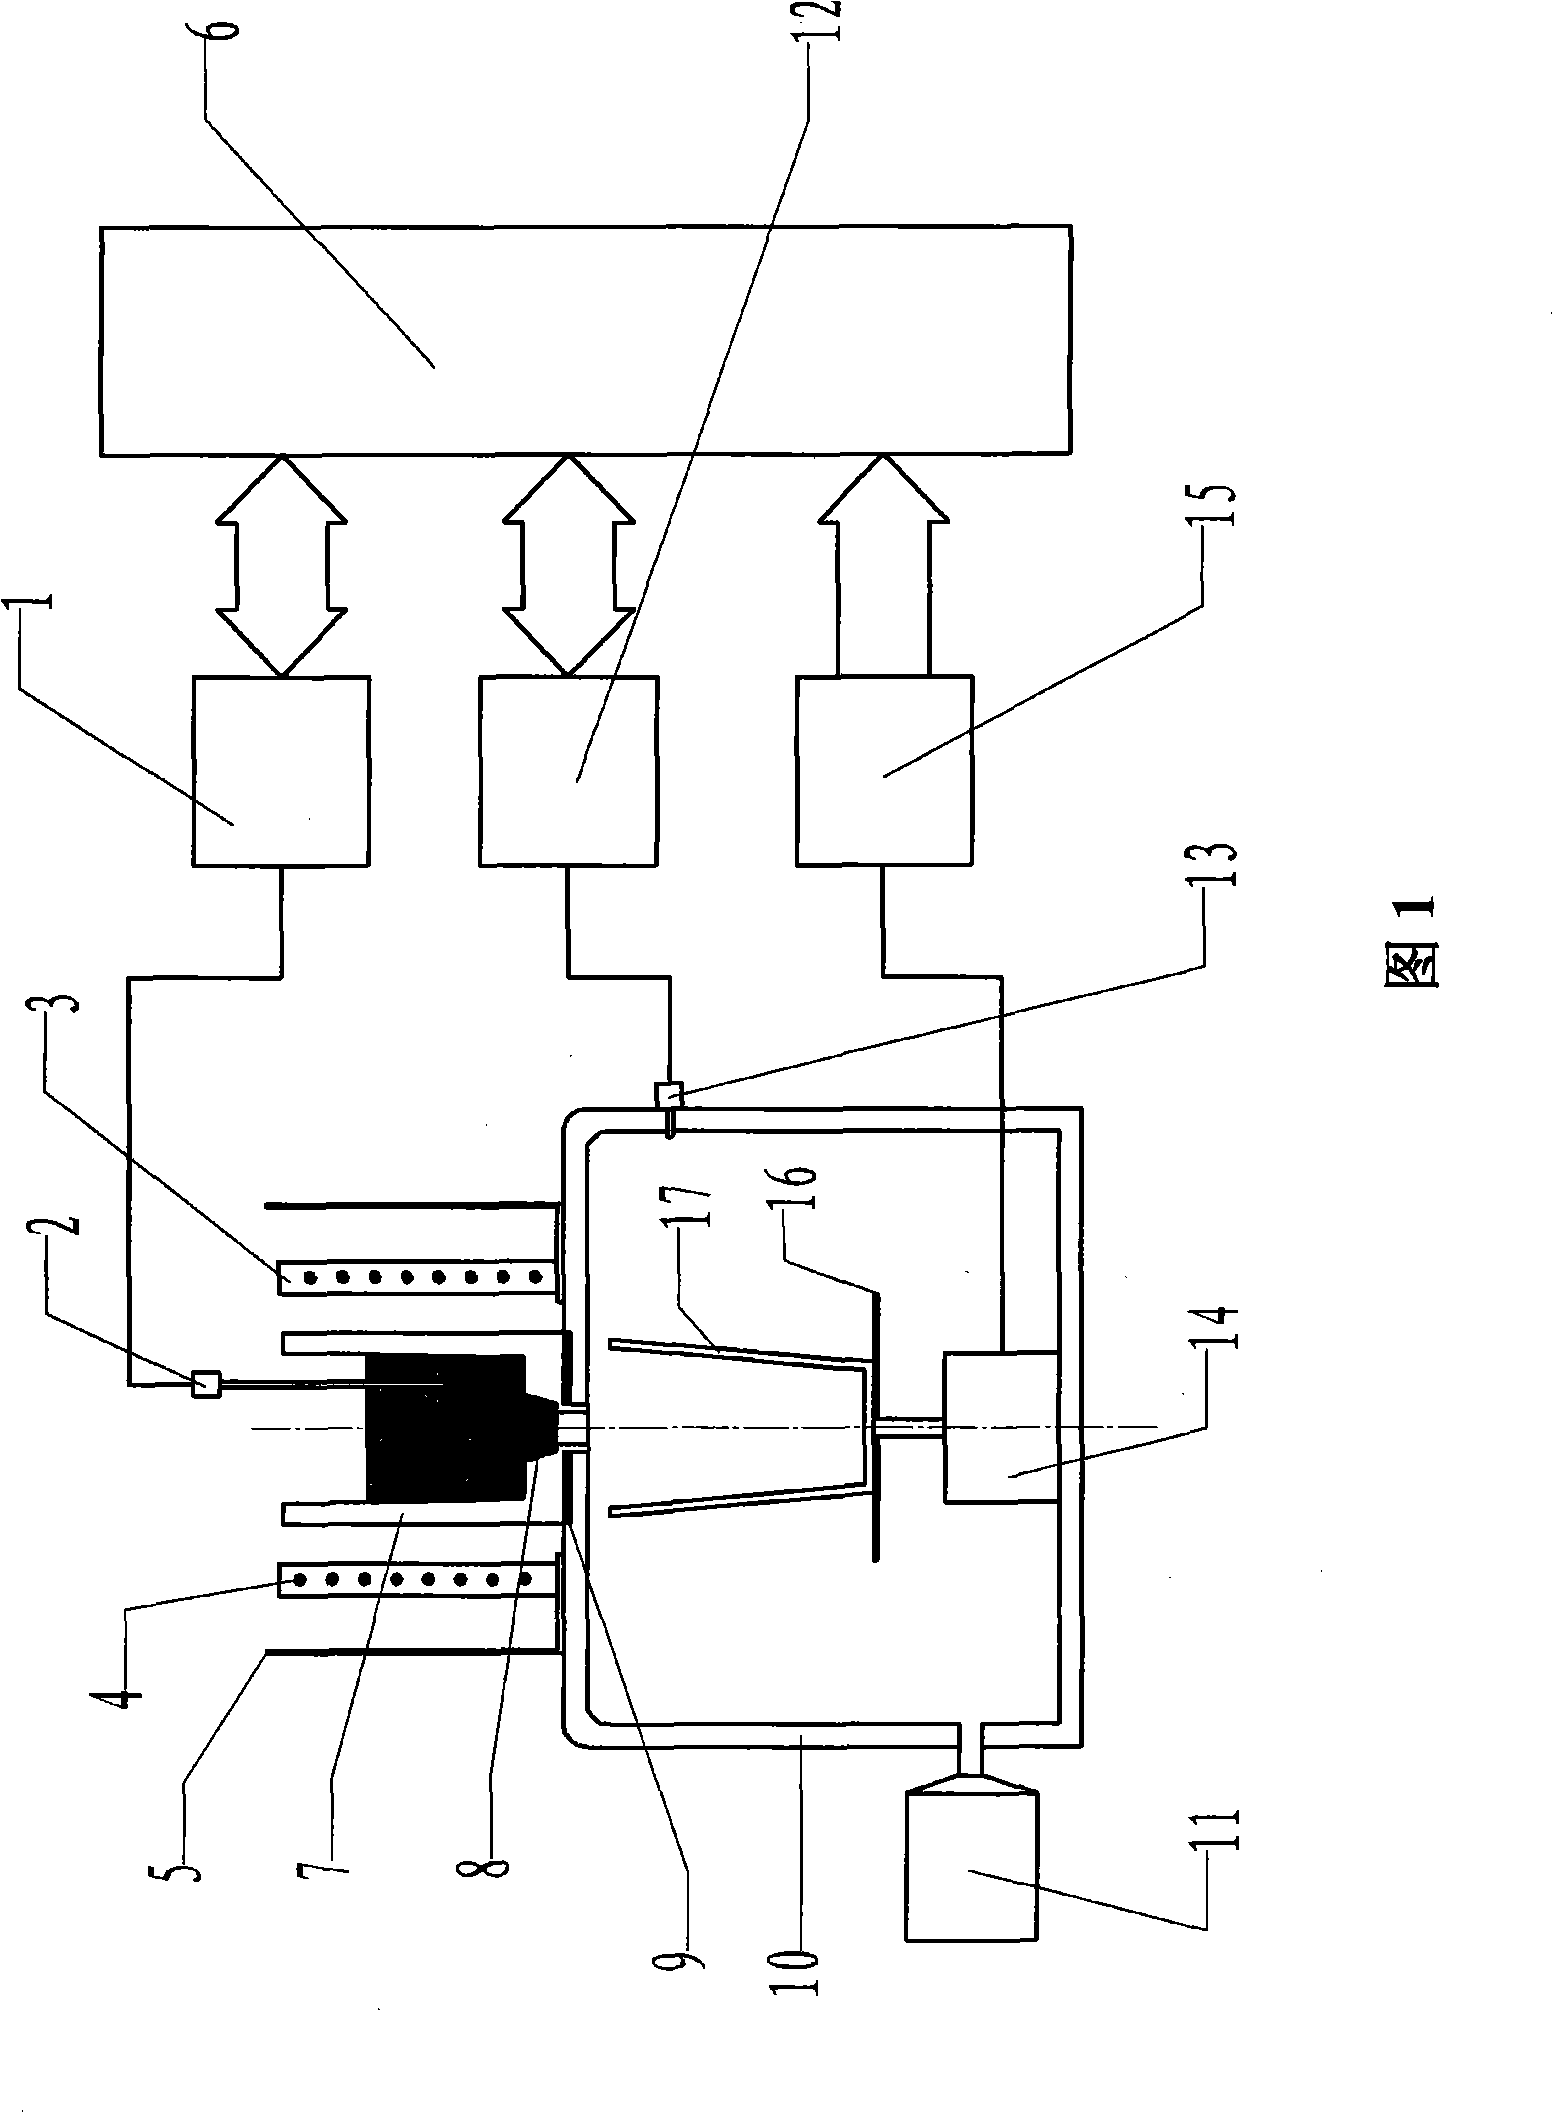 Apparatus for detection of foreign material in aluminum as well as aluminum alloy fondant